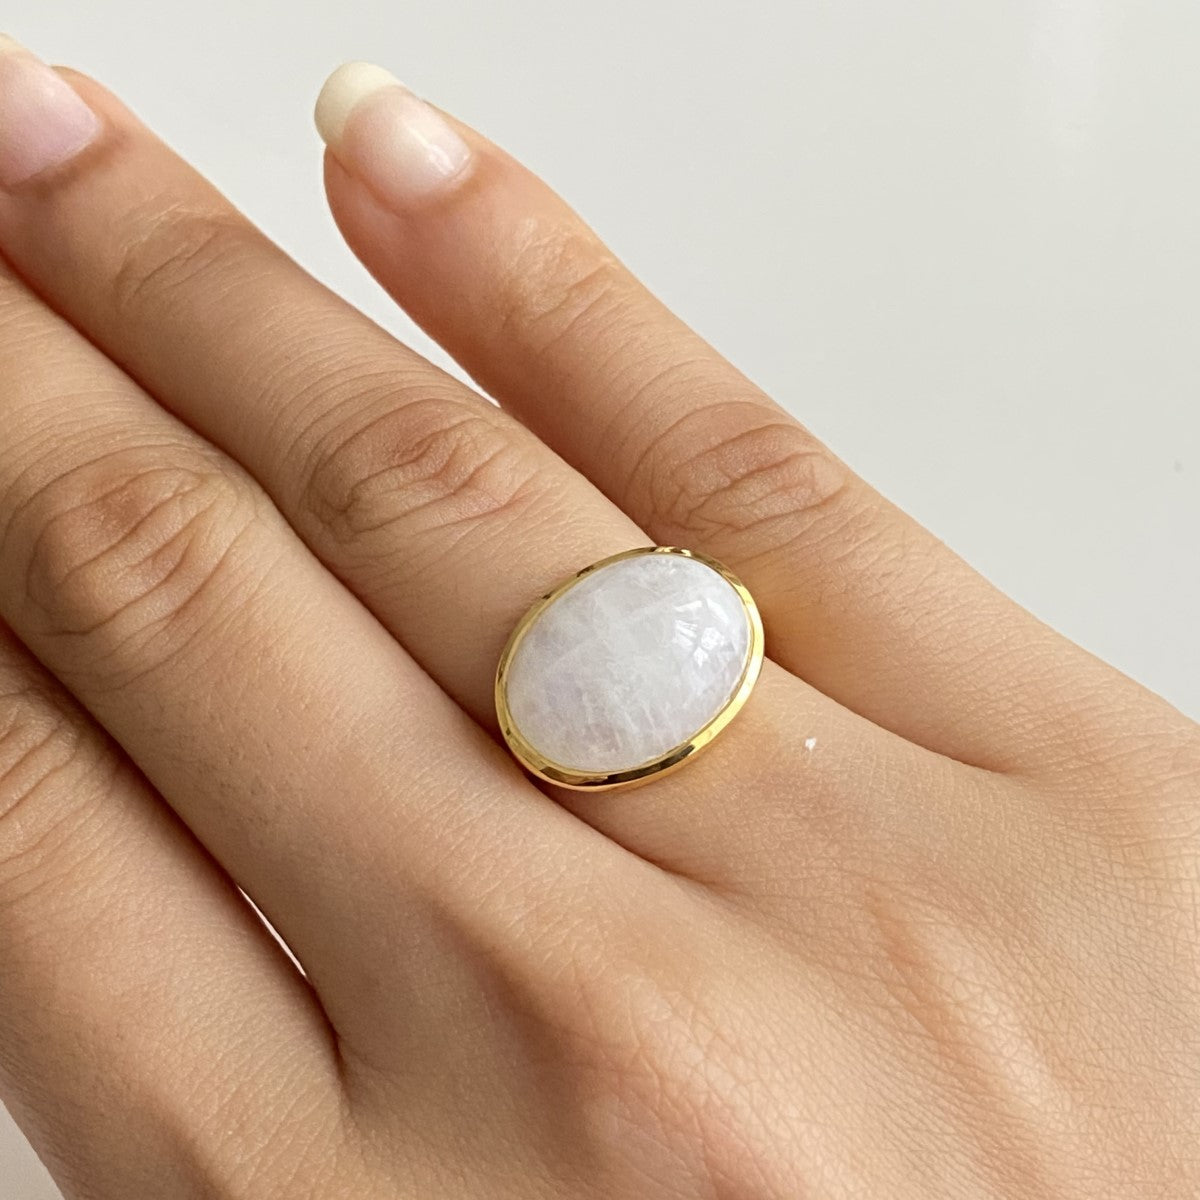 Cabochon Oval Cut Natural Gemstone Gold Plated Sterling Silver Ring - Moonstone